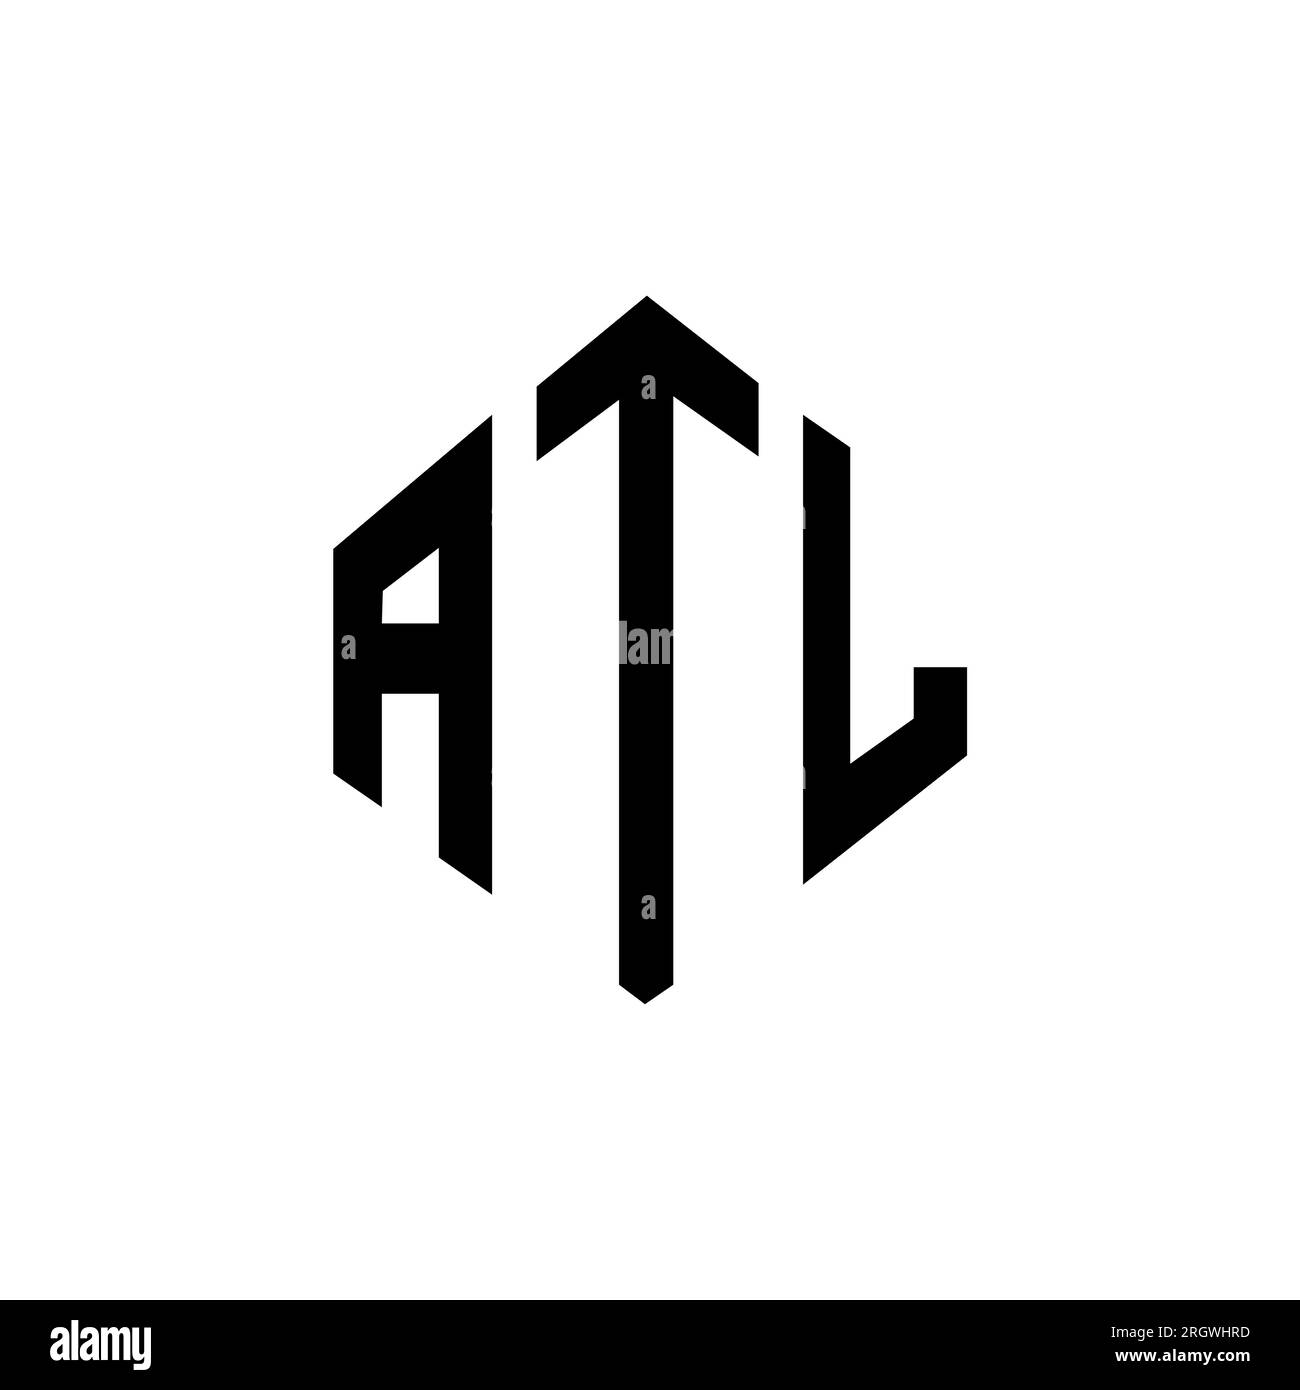 ATL letter logo design with polygon shape. ATL polygon and cube shape logo design. ATL hexagon vector logo template white and black colors. ATL monogr Stock Vector